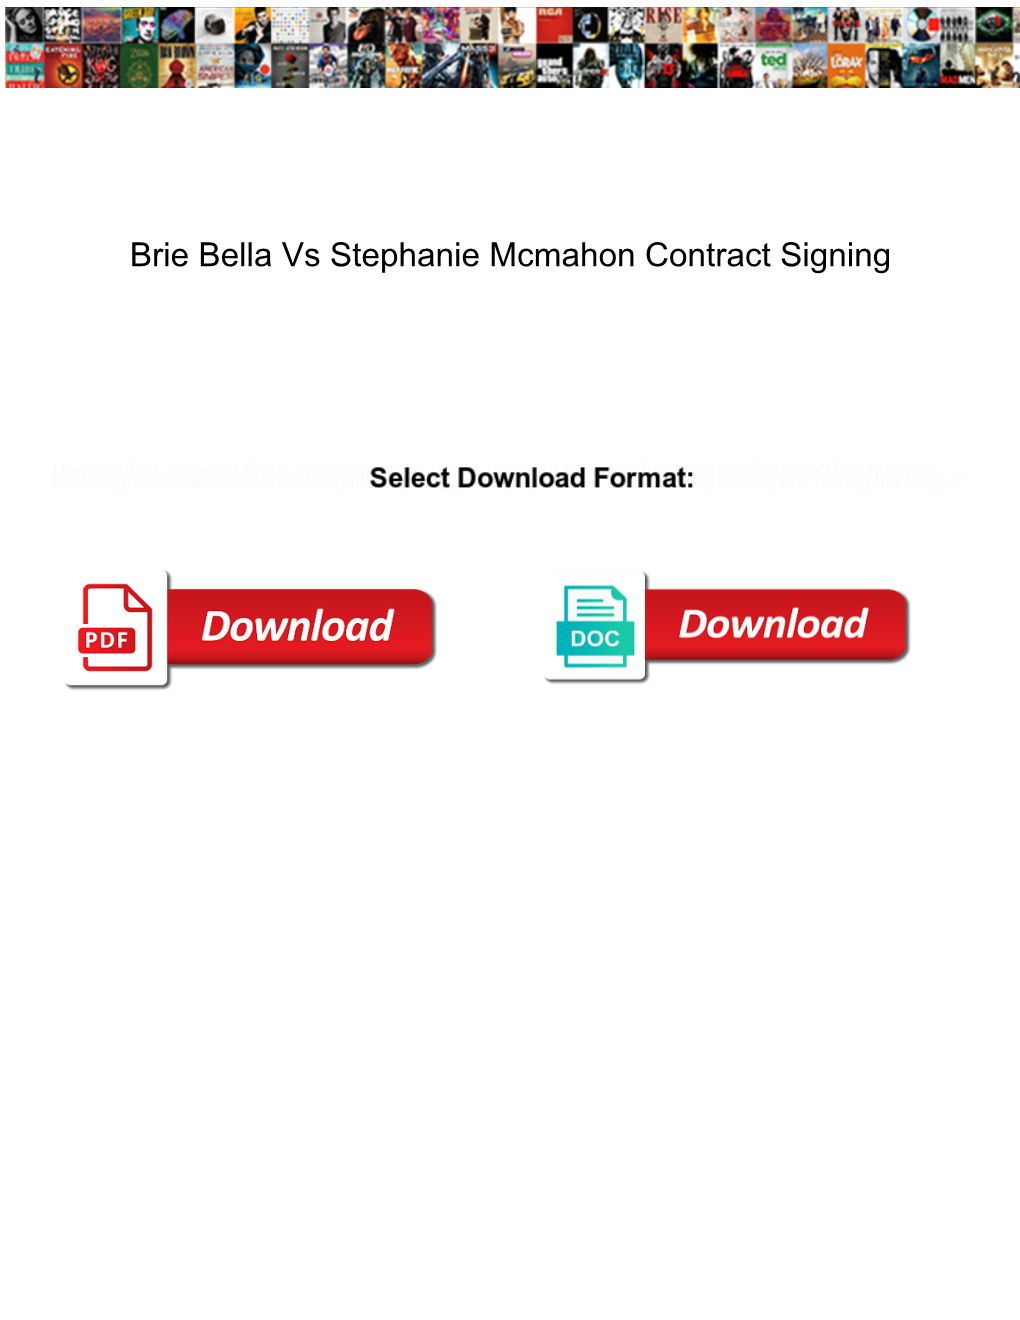 Brie Bella Vs Stephanie Mcmahon Contract Signing